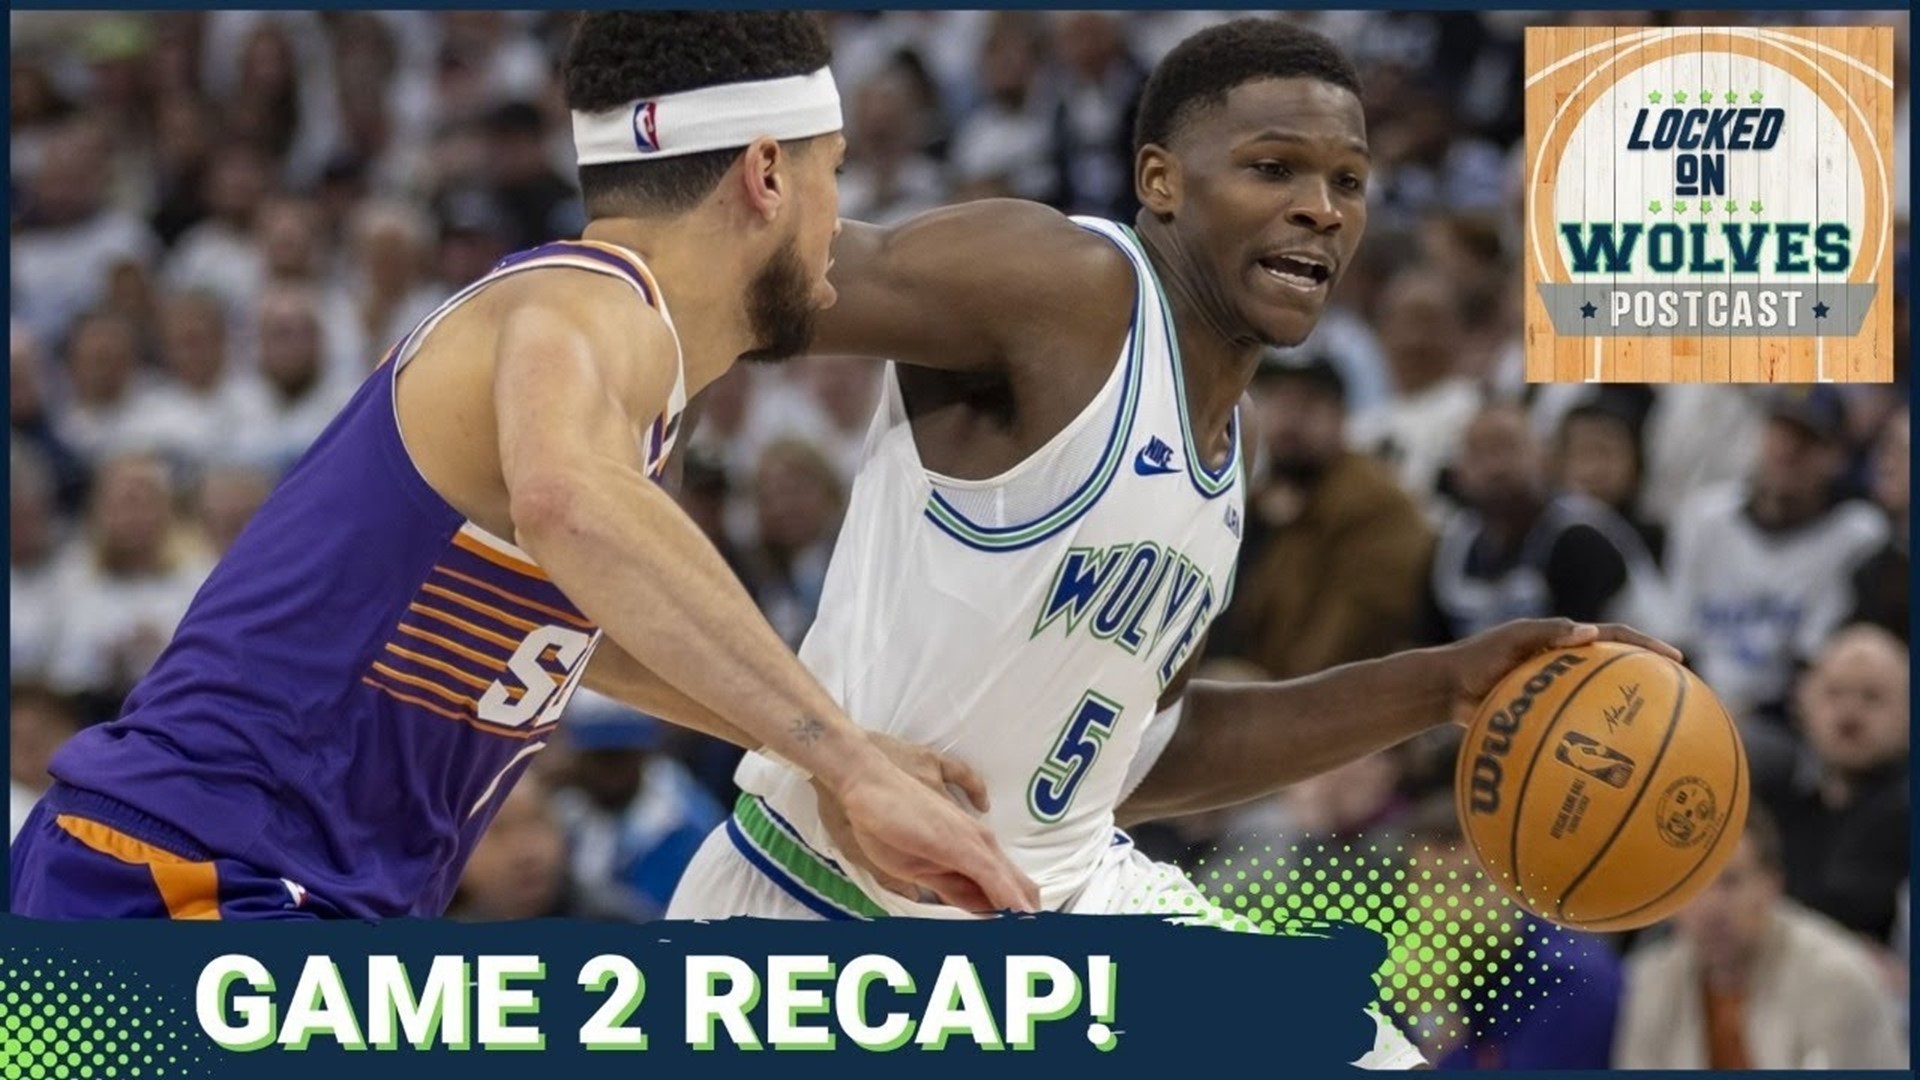 The Minnesota Timberwolves protected home court advantage against the Phoenix Suns in game two of the playoffs. Luke Inman and Sam Ekstrom react.